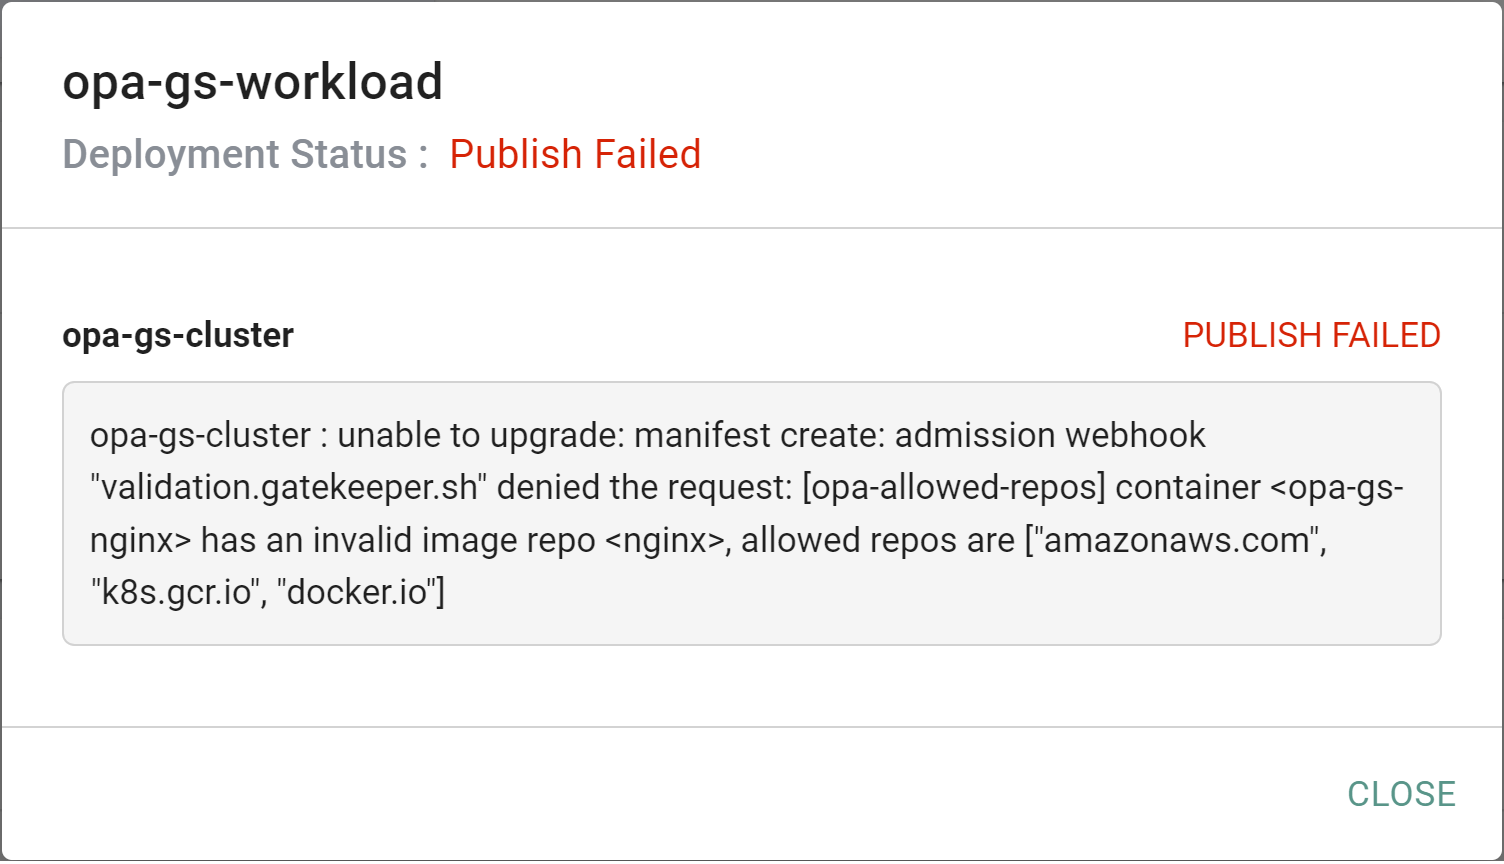 Failed Workload Details